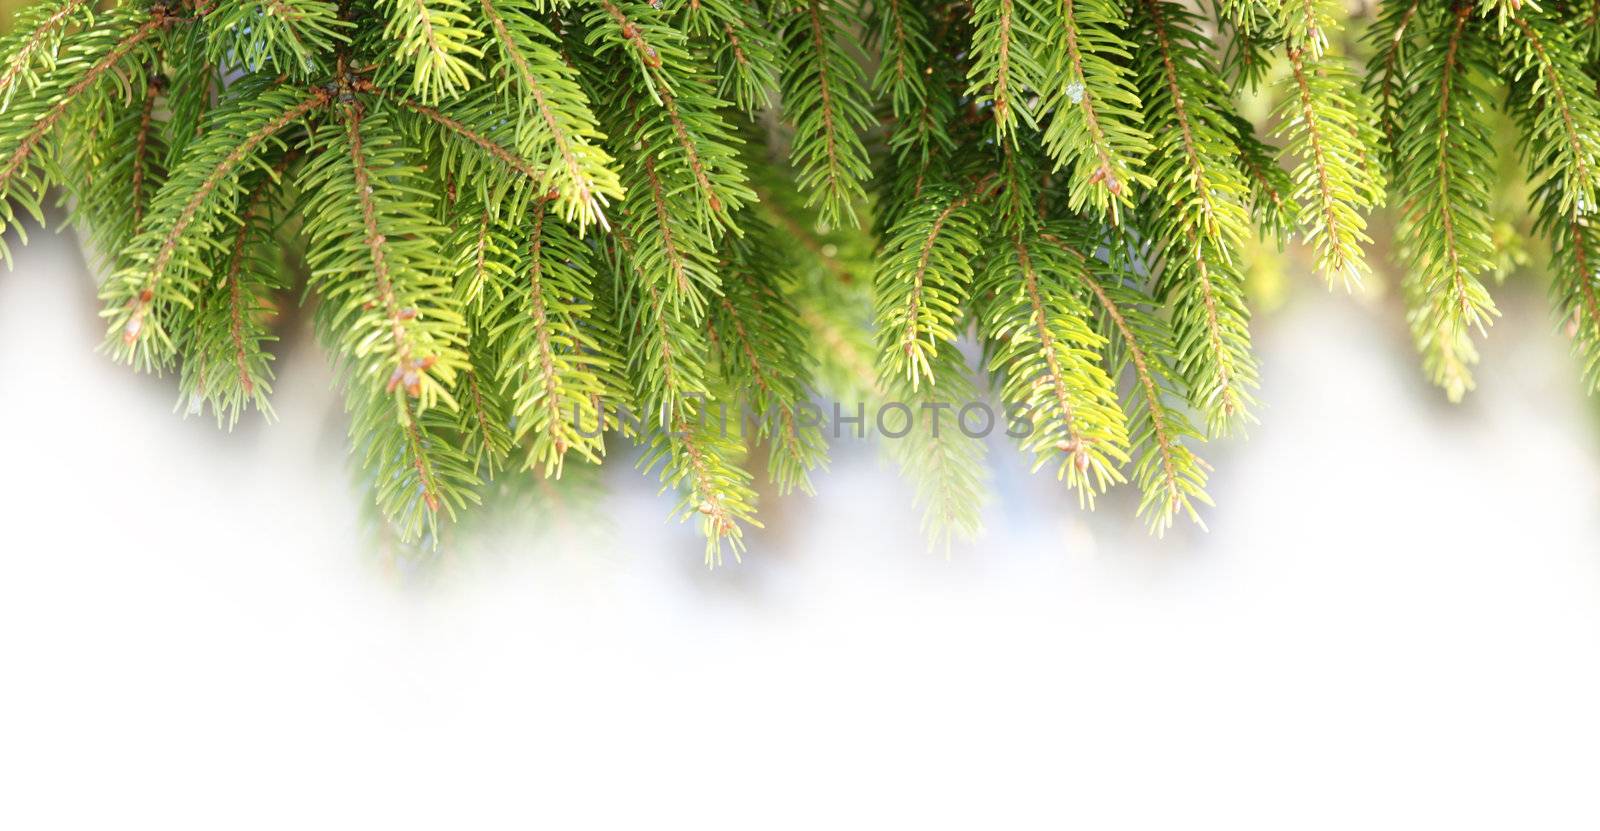 Decorations of pine branches by photochecker